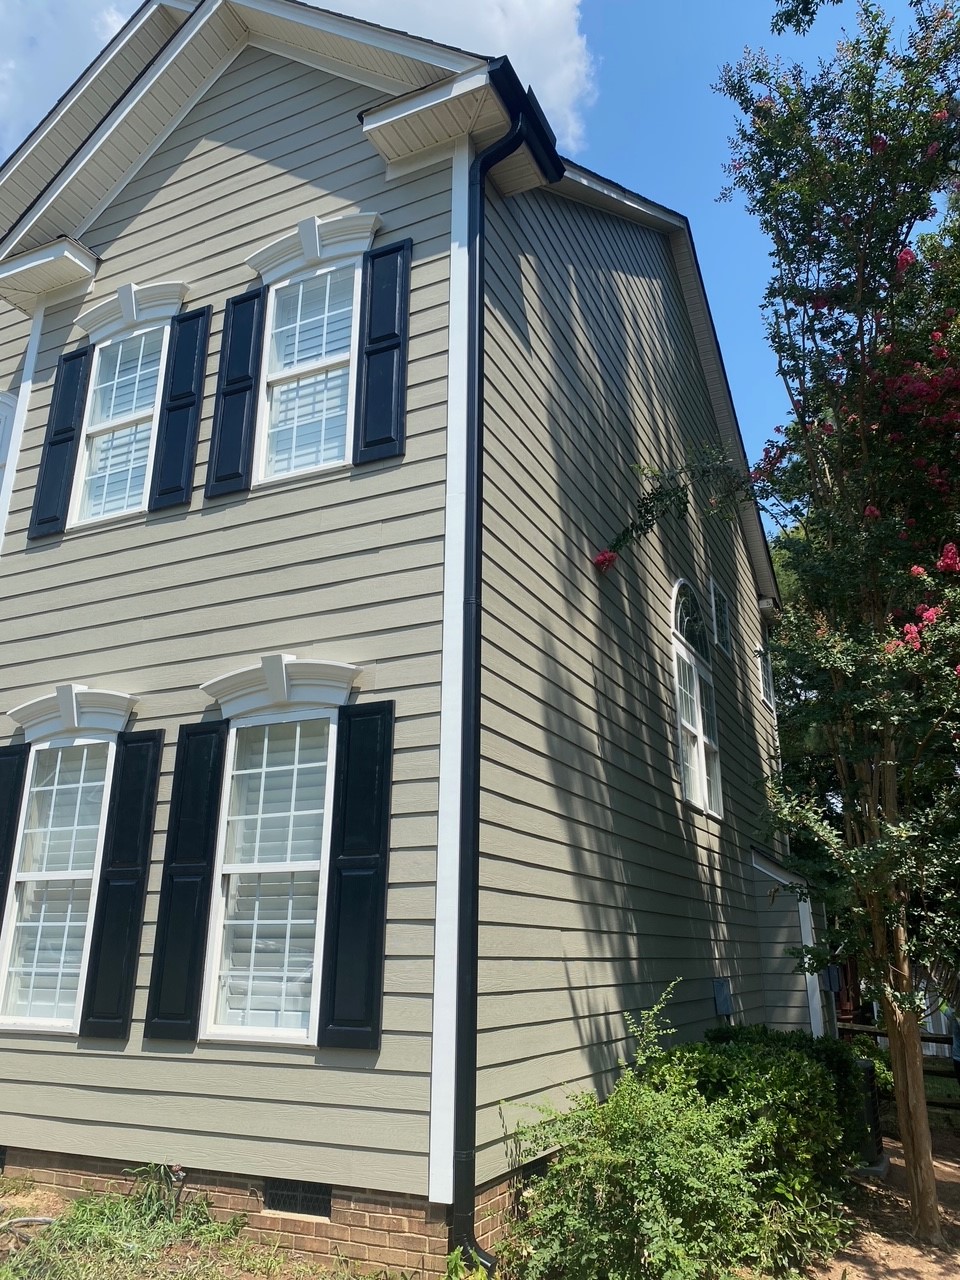 Why Should I Choose Belk Builders For My HardiePlank Siding Replacement/Installation?